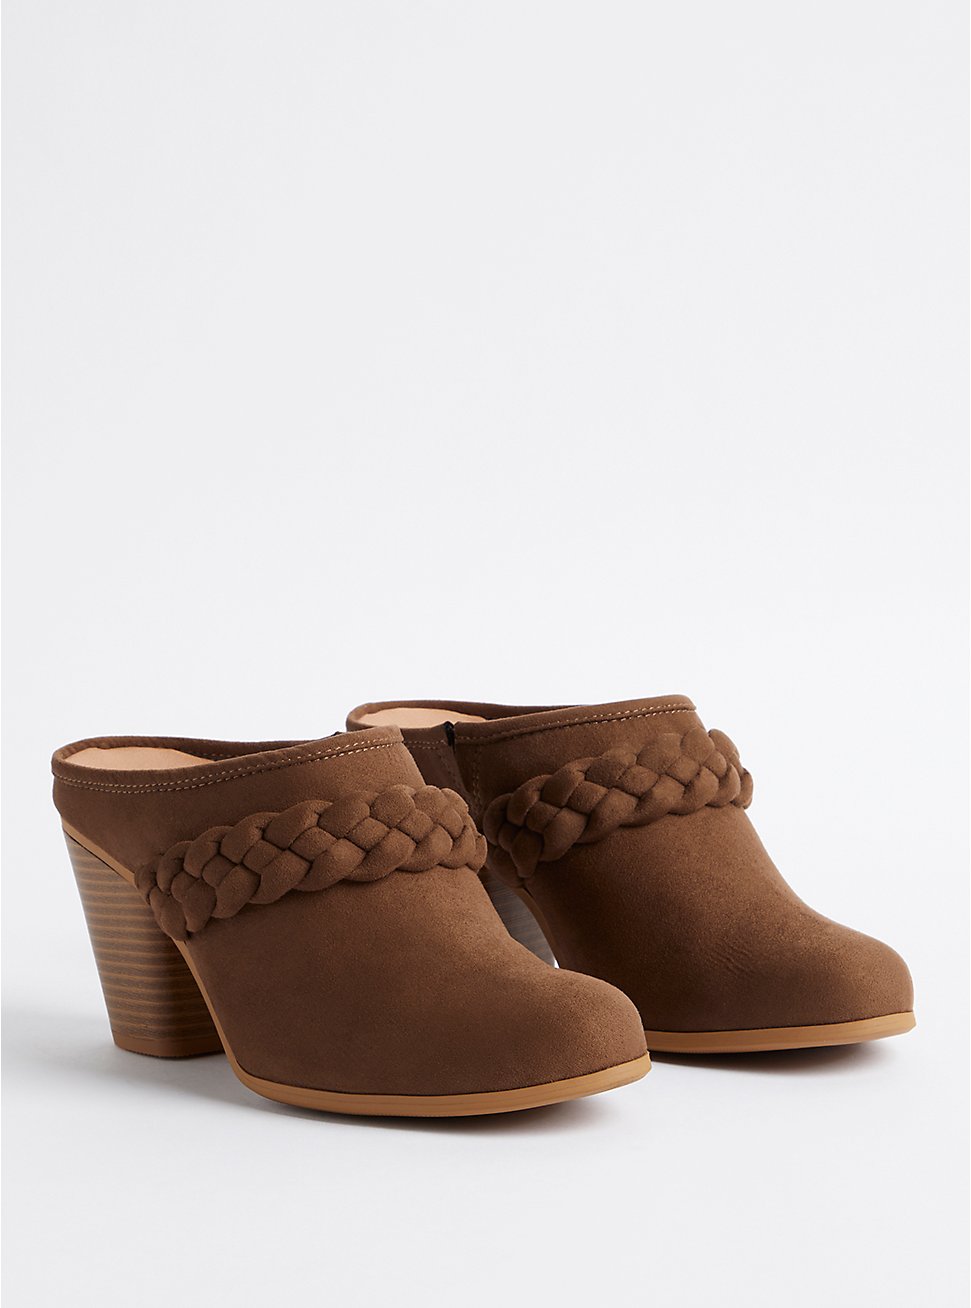 Plus Size Studded Mule - Faux Suede Brown (WW), BROWN, hi-res